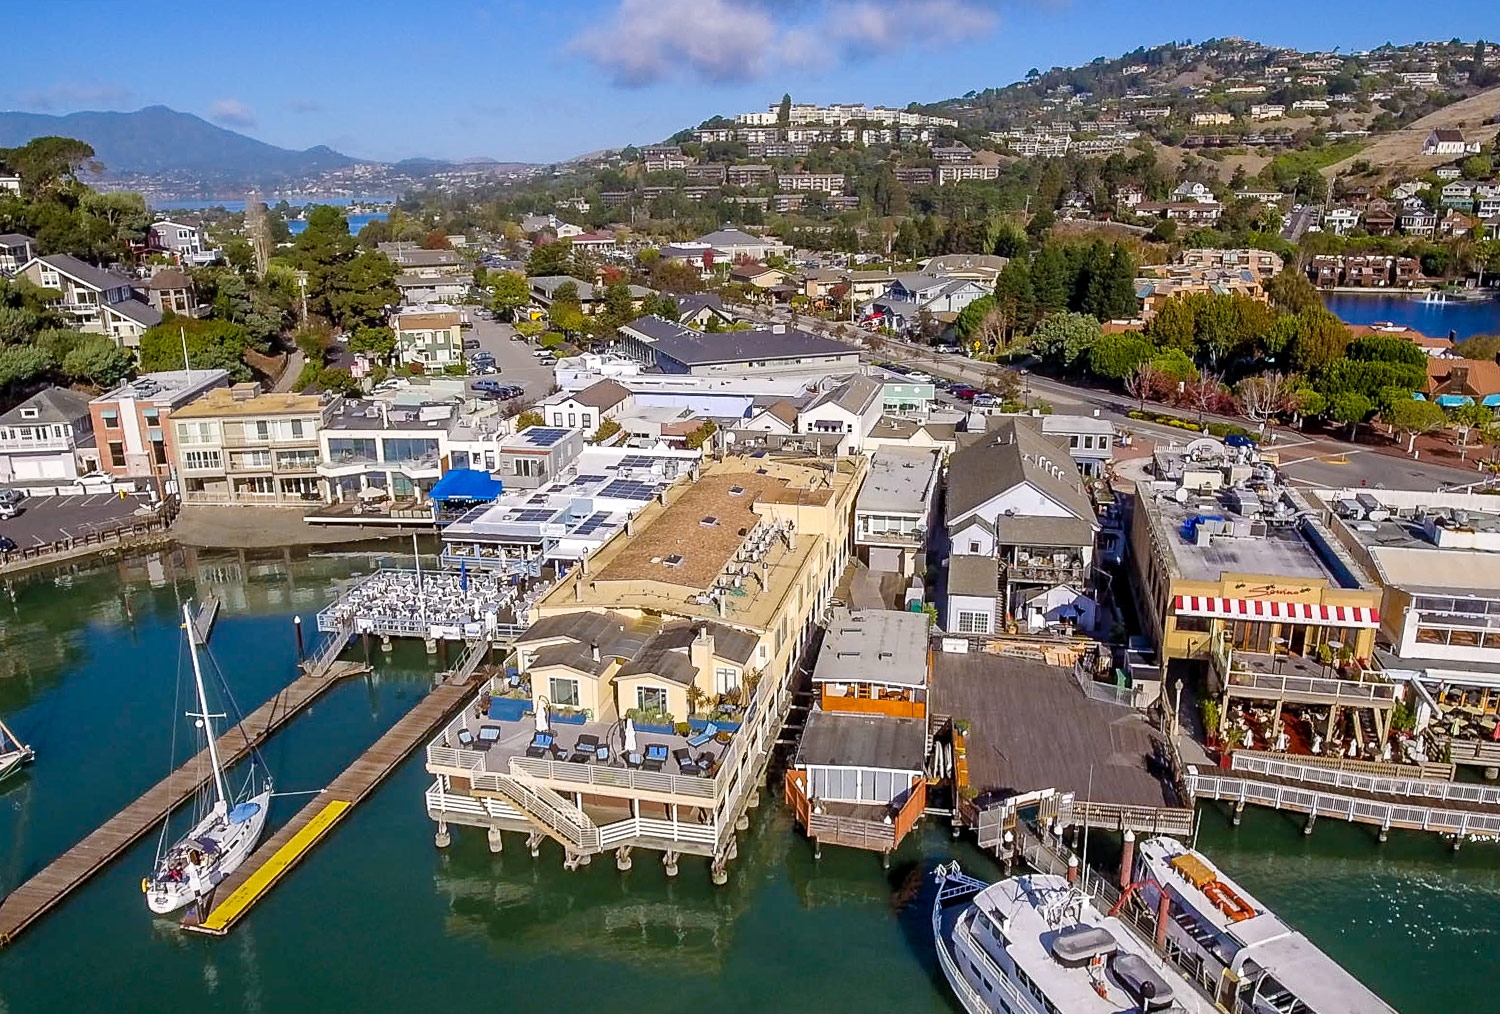 Waters Edge Hotel in Tiburon California is perched on the shore of San Francisco Bay with a bayside deck for beautiful views